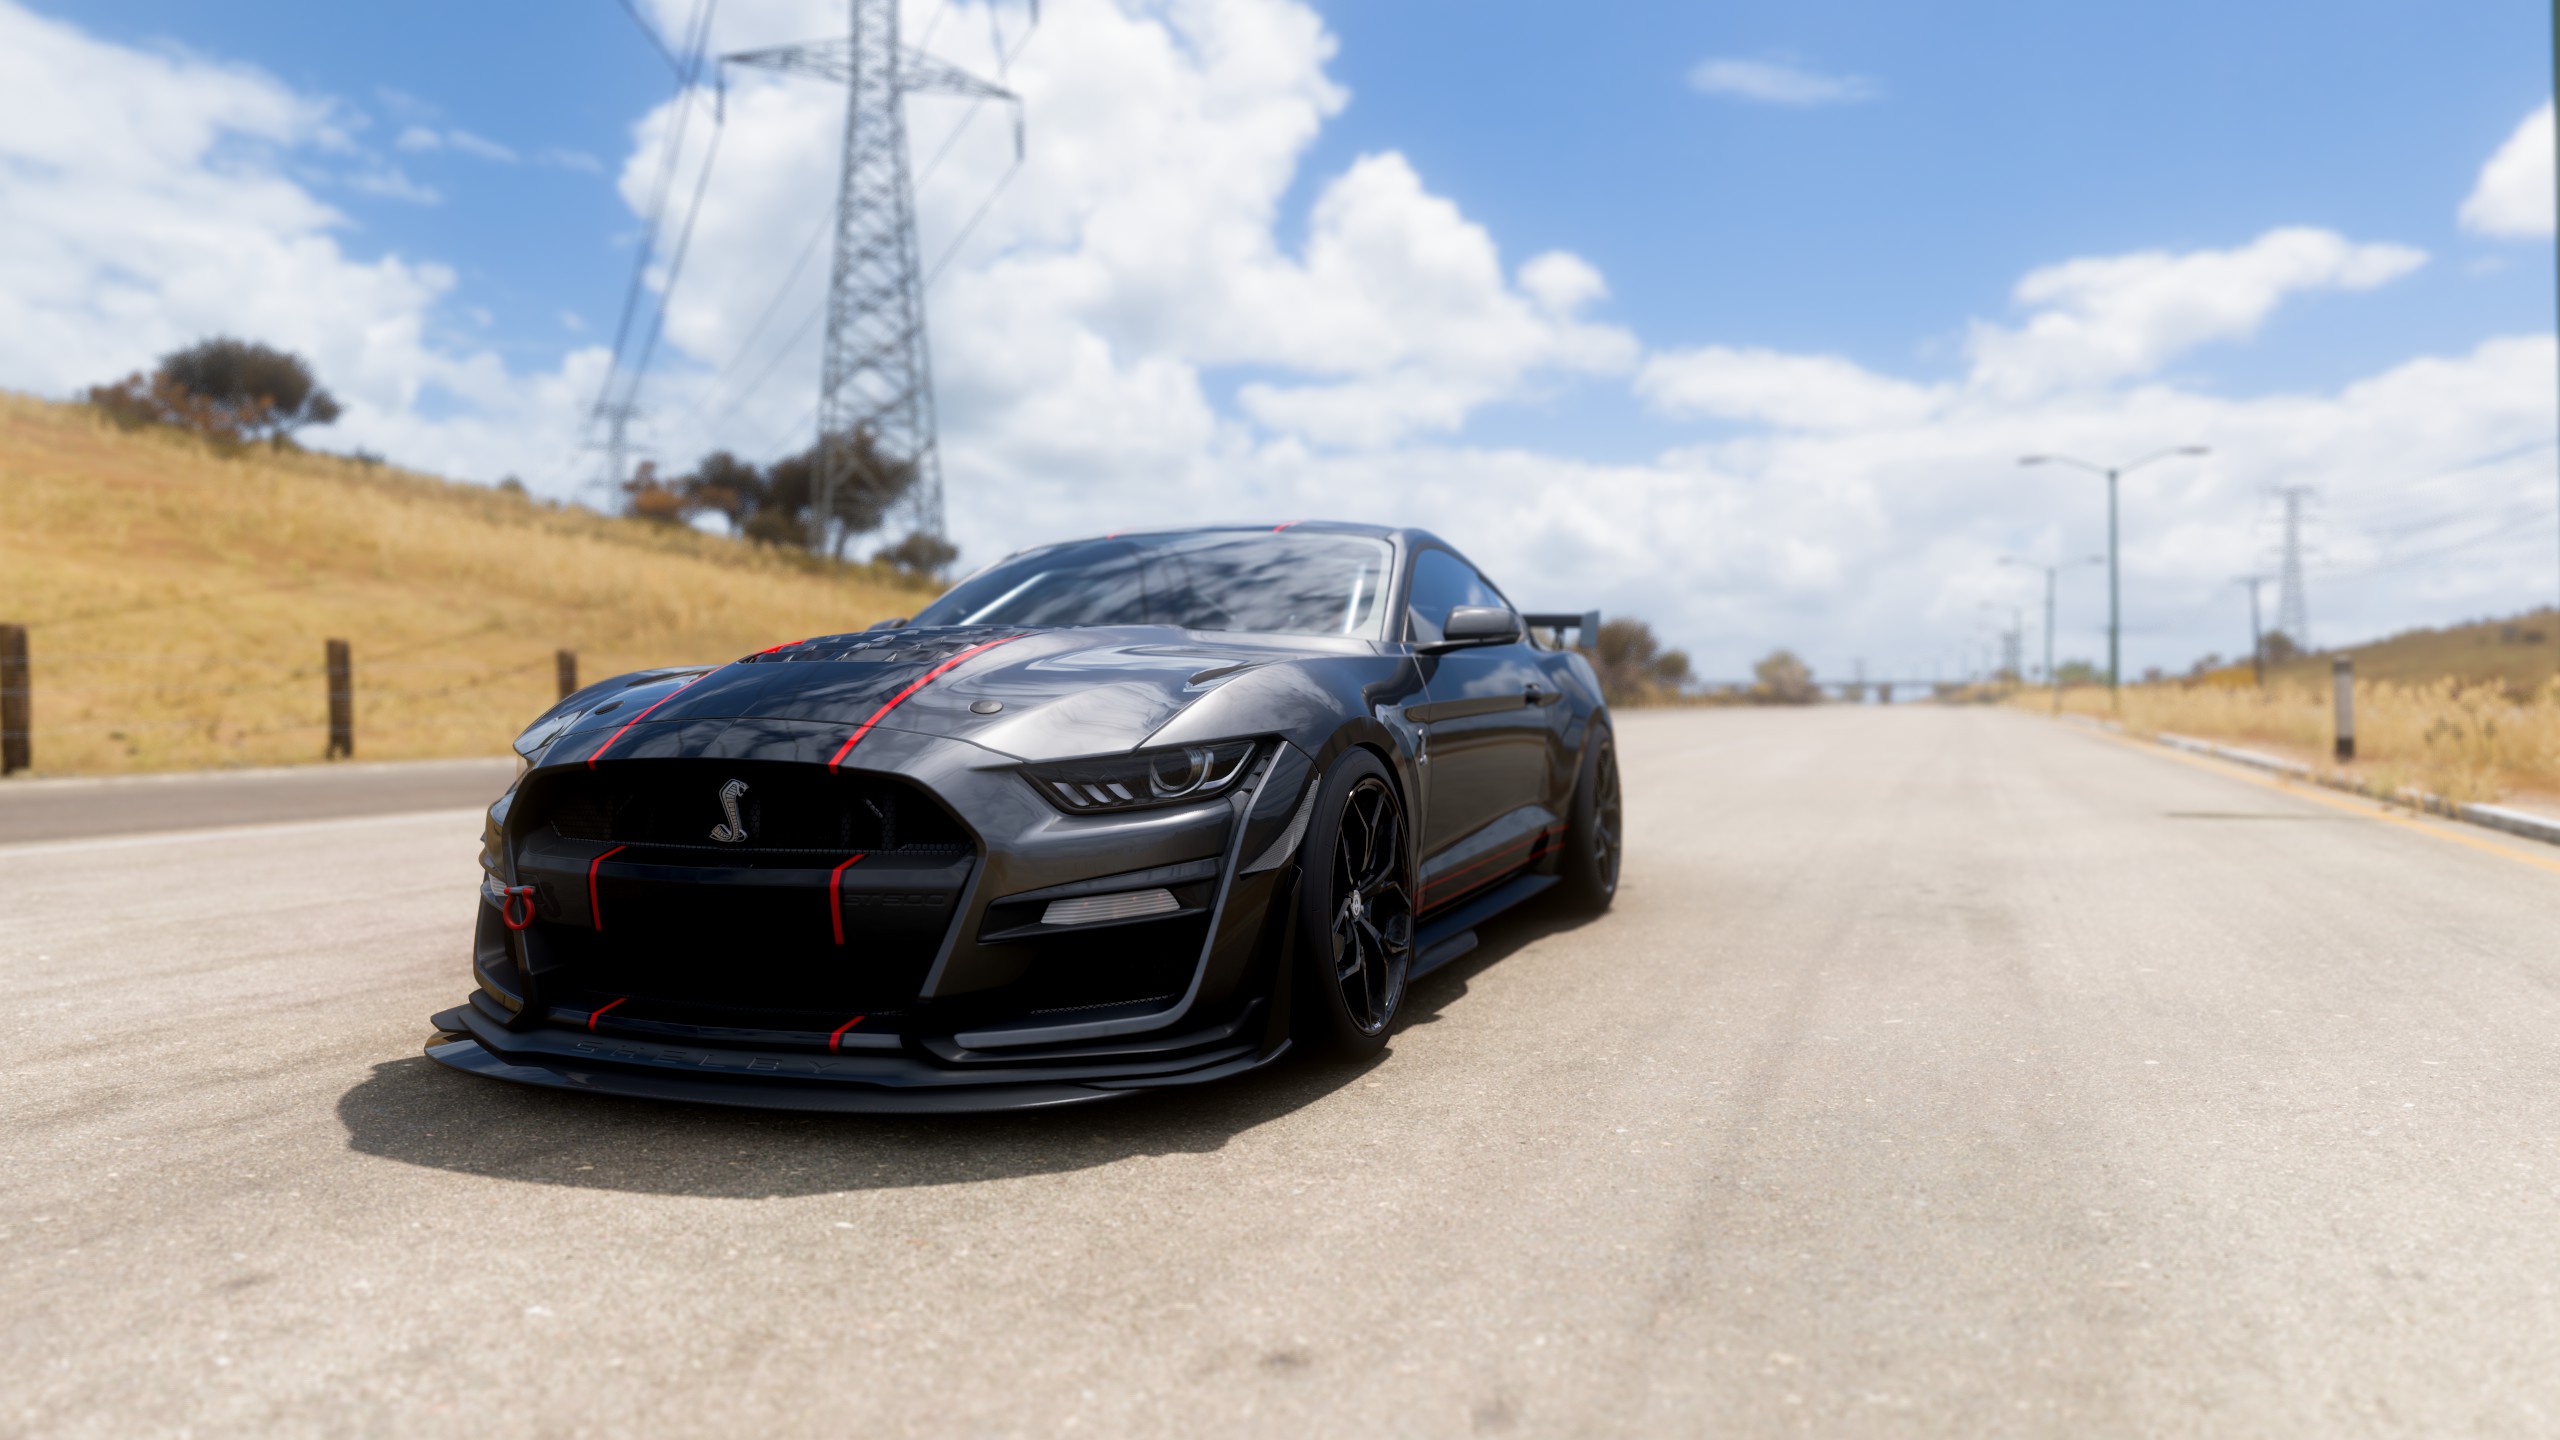 General 2560x1440 Forza Horizon 5 Ford Mustang Ford Mustang Shelby car digital art video games outdoors asphalt road power lines muscle cars American cars Turn 10 Studios PlaygroundGames Xbox Game Studios